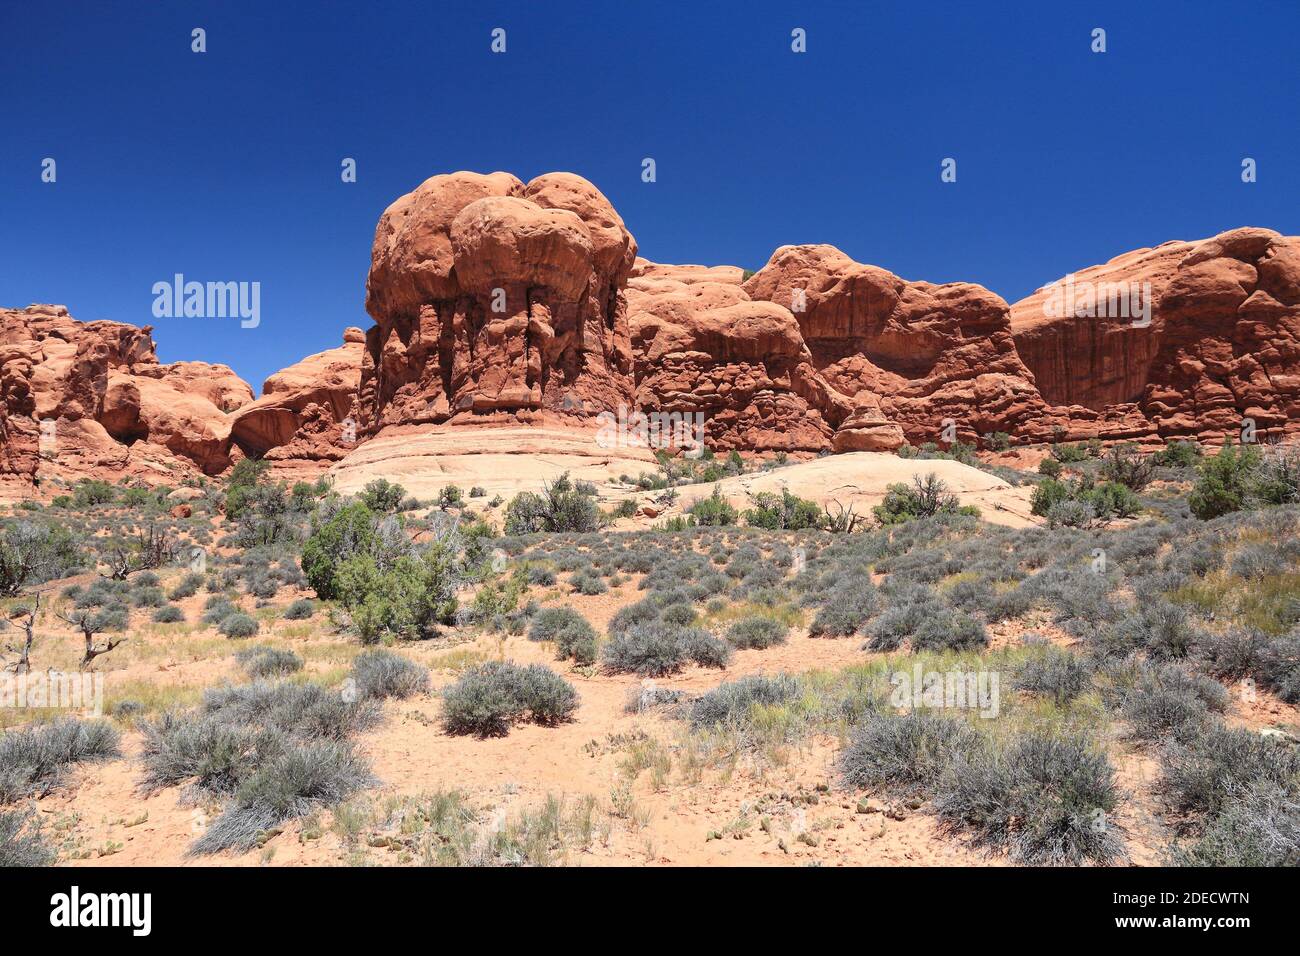 America landscape - Arches National Park in Utah. Stock Photo